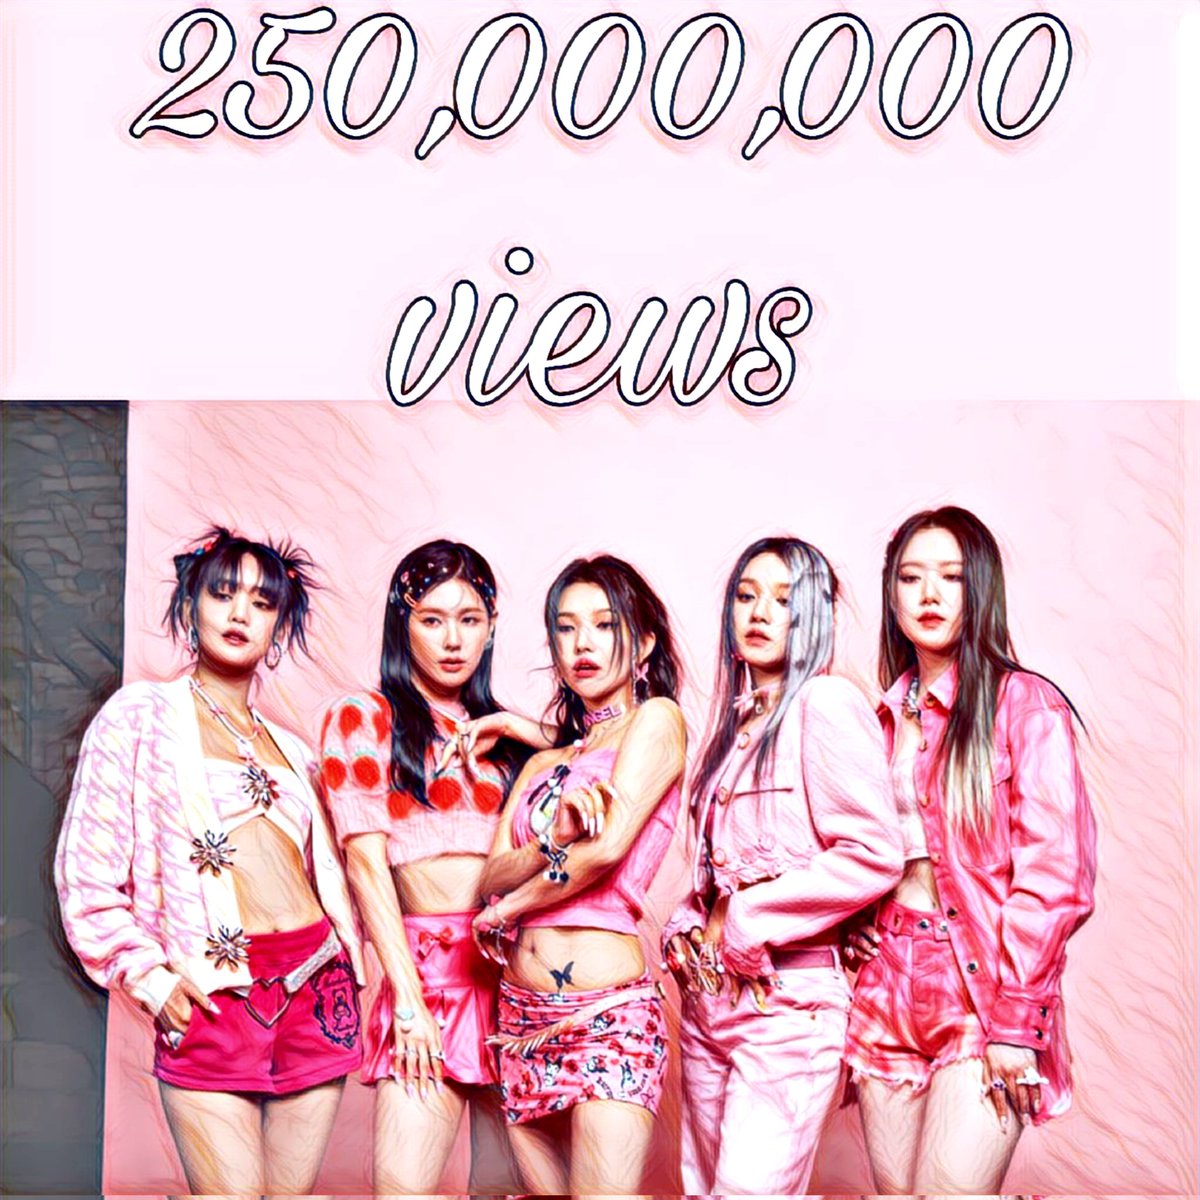 Queencard MV joins Tomboy and Nxde as @G_I_DLE 3rd MV to reach 250,000,000 views on YouTube! #QUEENCARD250MVIEWS #GIDLE #여자아이들 @G_I_DLE